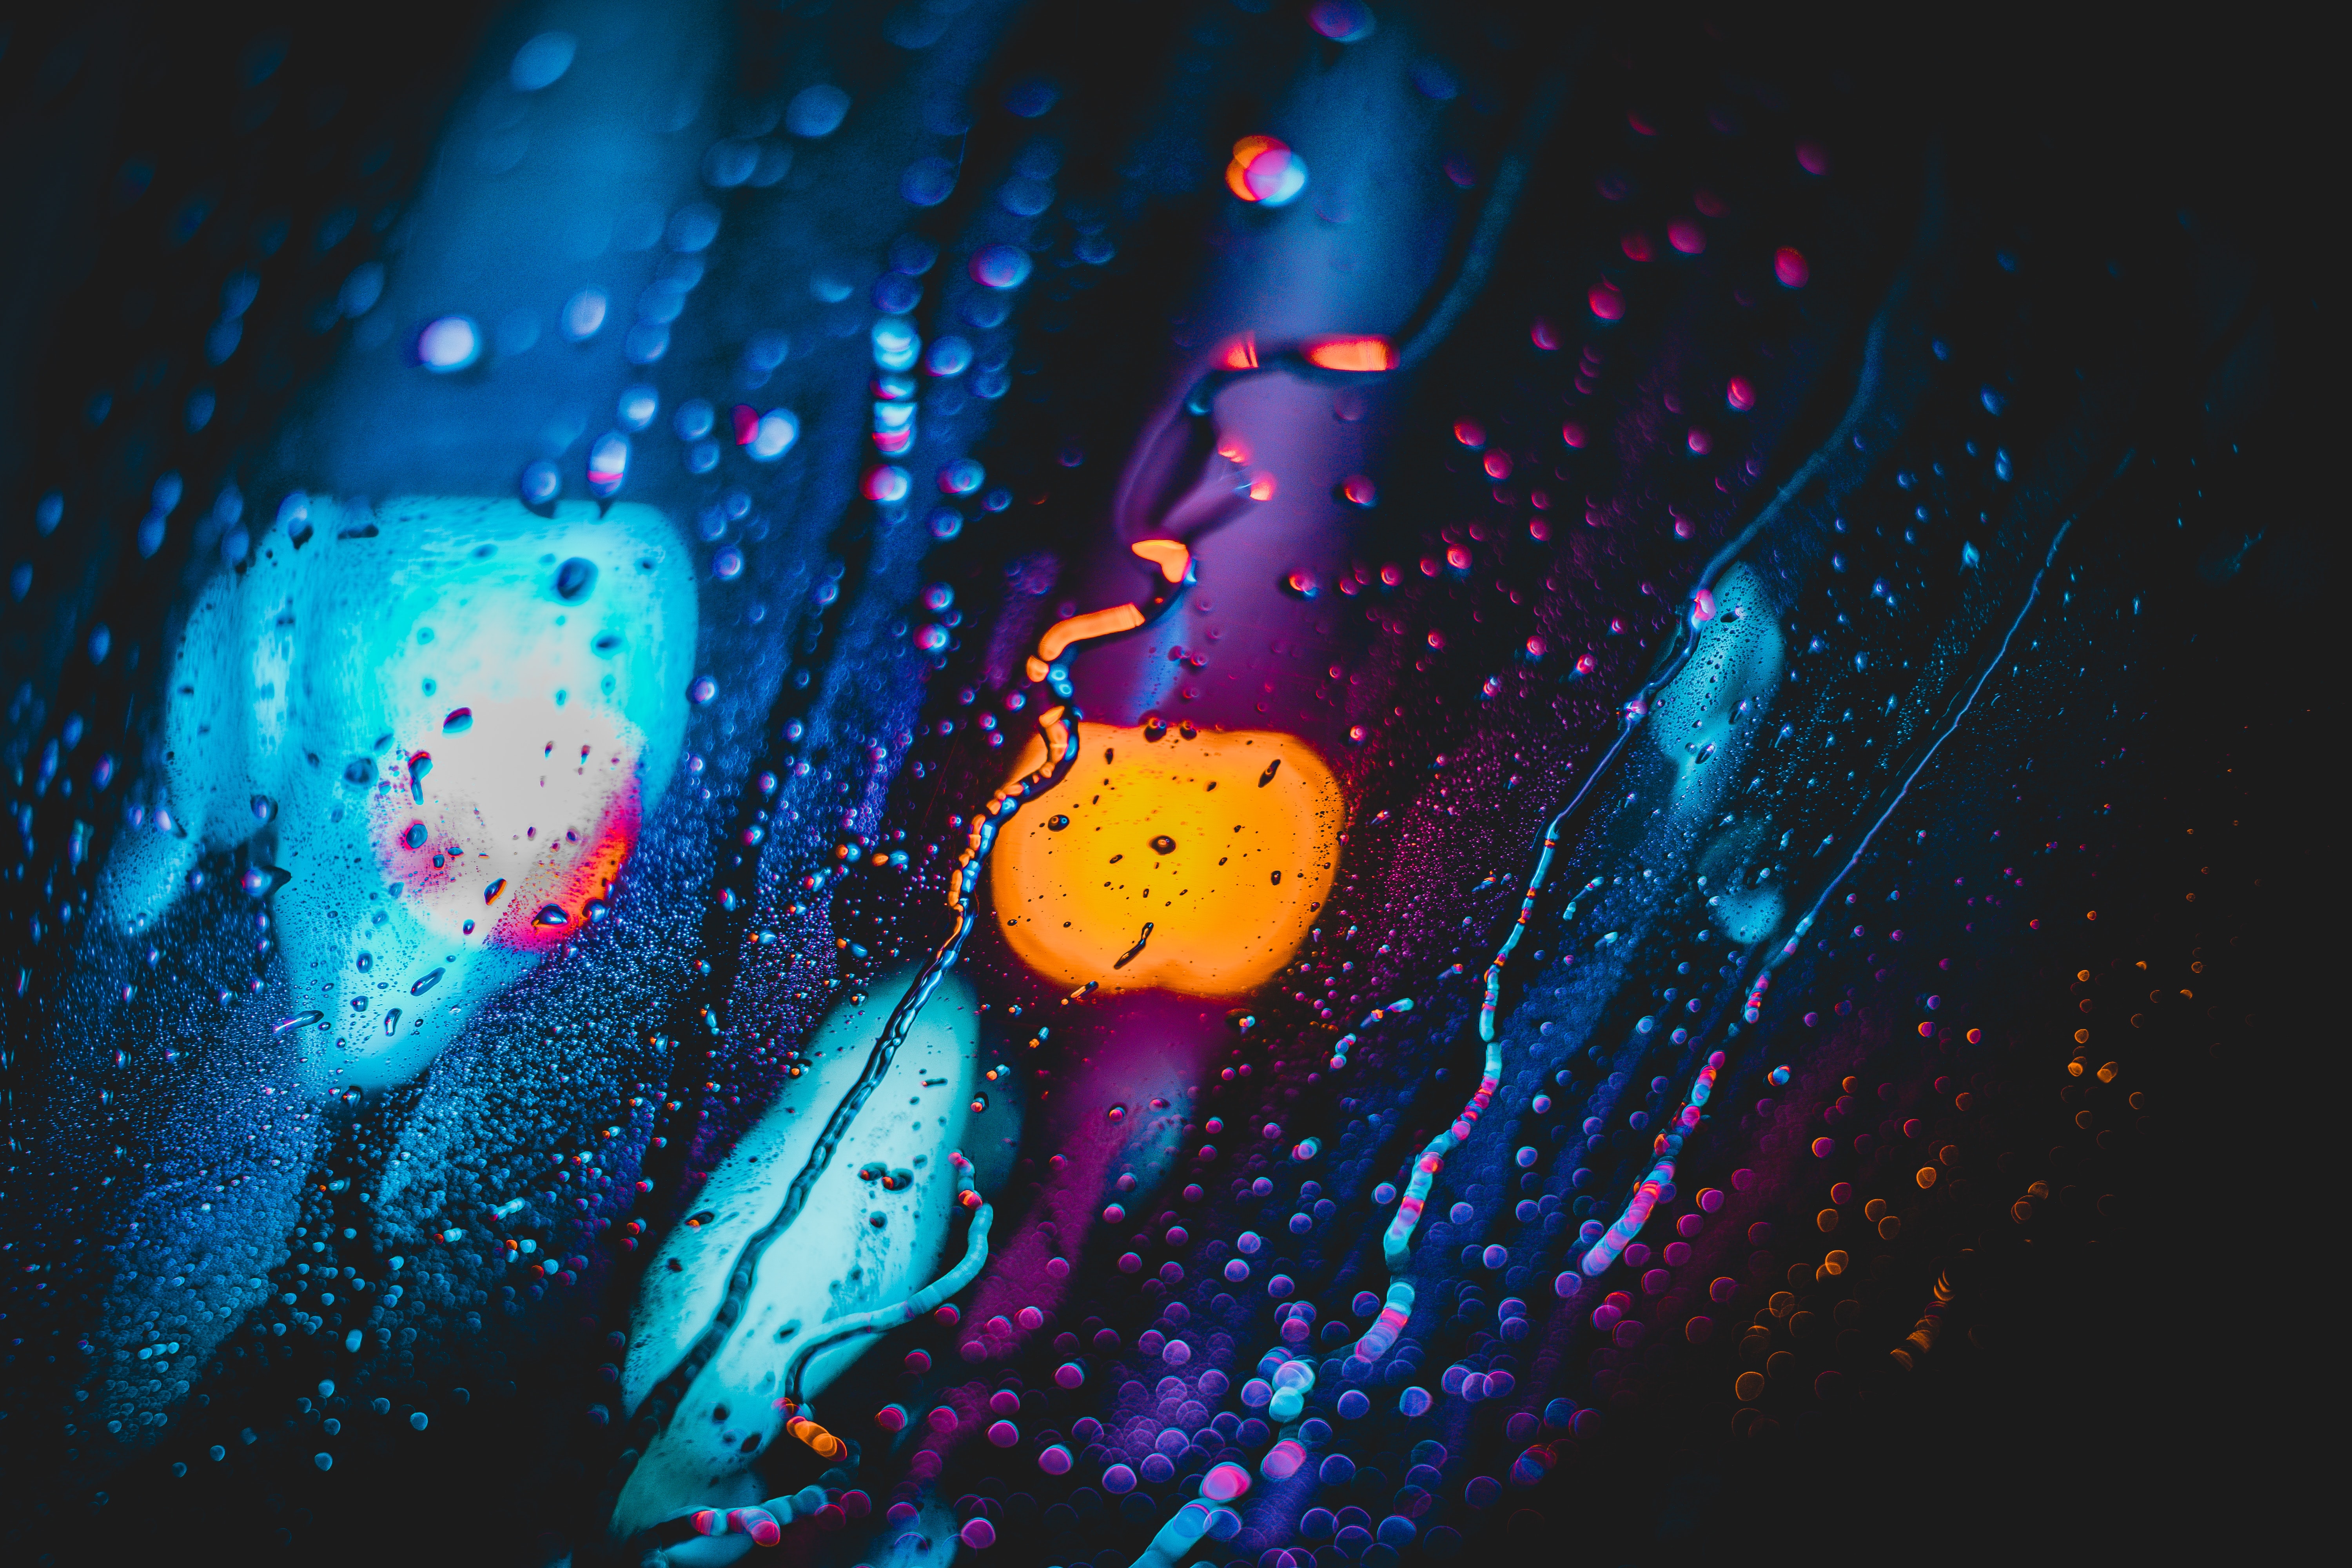 blur, miscellaneous, neon, drops, glare, miscellanea, smooth, glow cell phone wallpapers